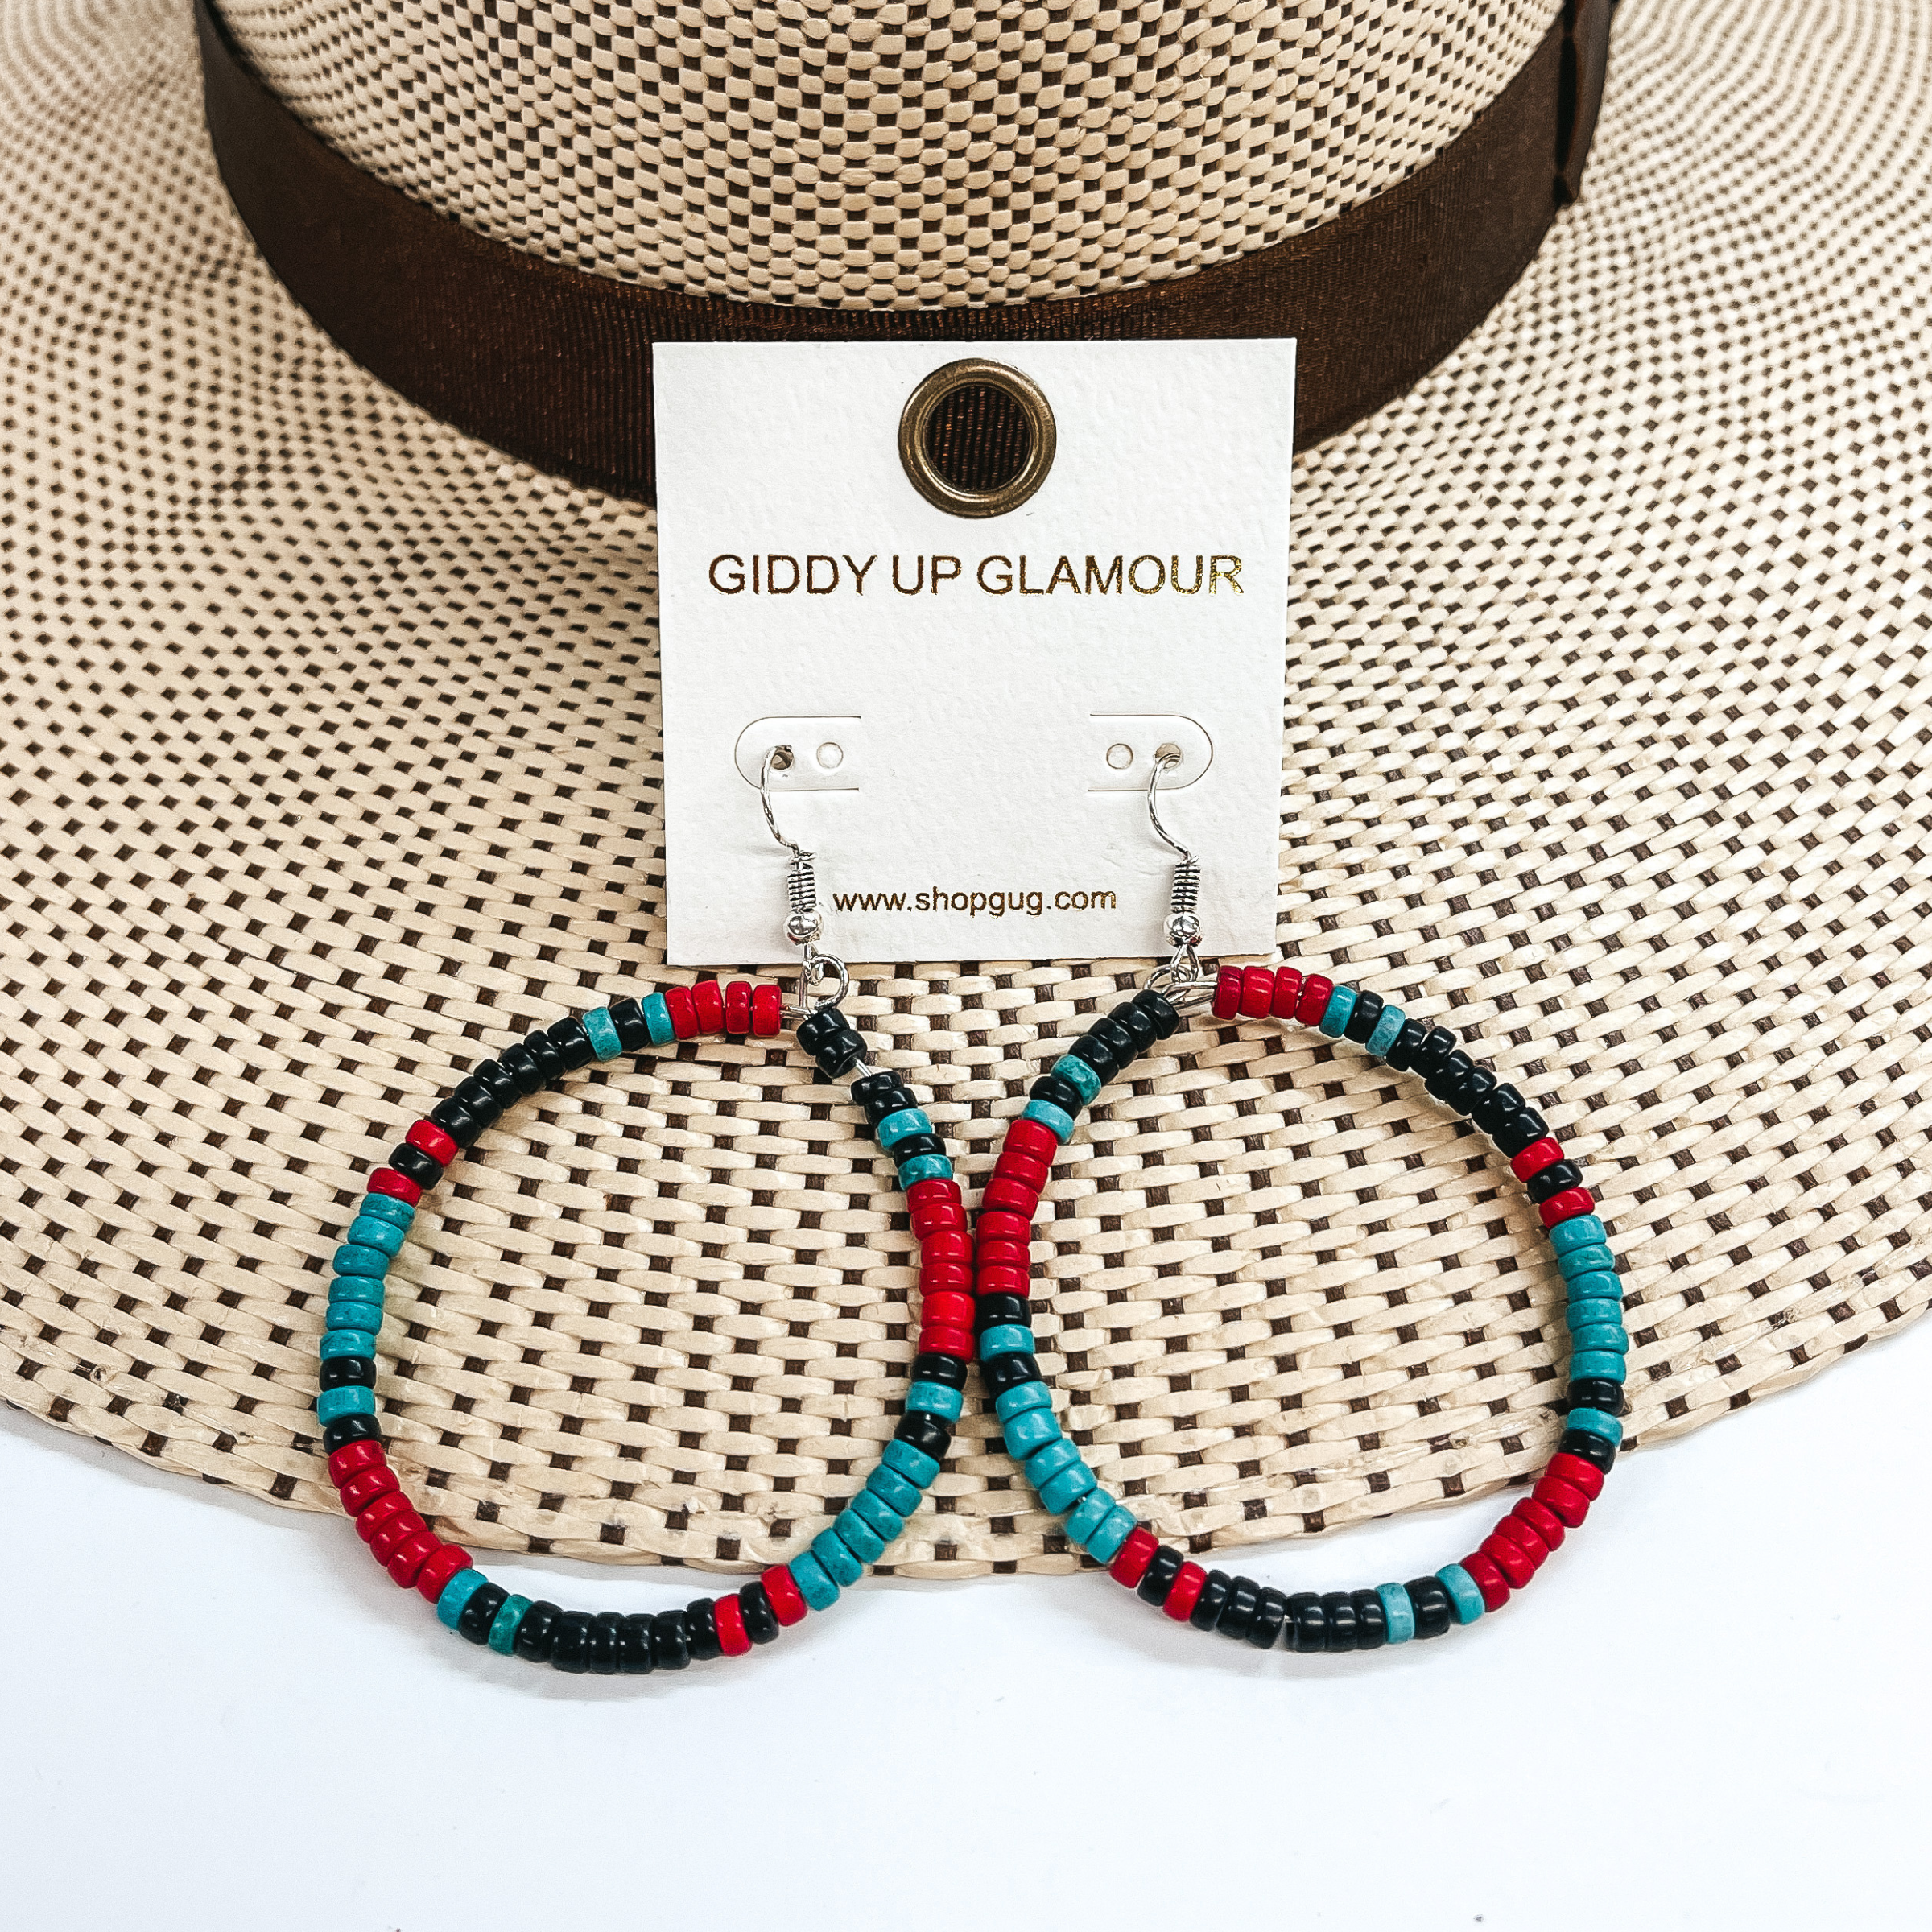 These are circle hoop earrings with multicolored  beads  all around. The beads are red, turquoise, and  black. These earrings are taken on a straw hat brim  and a white background.